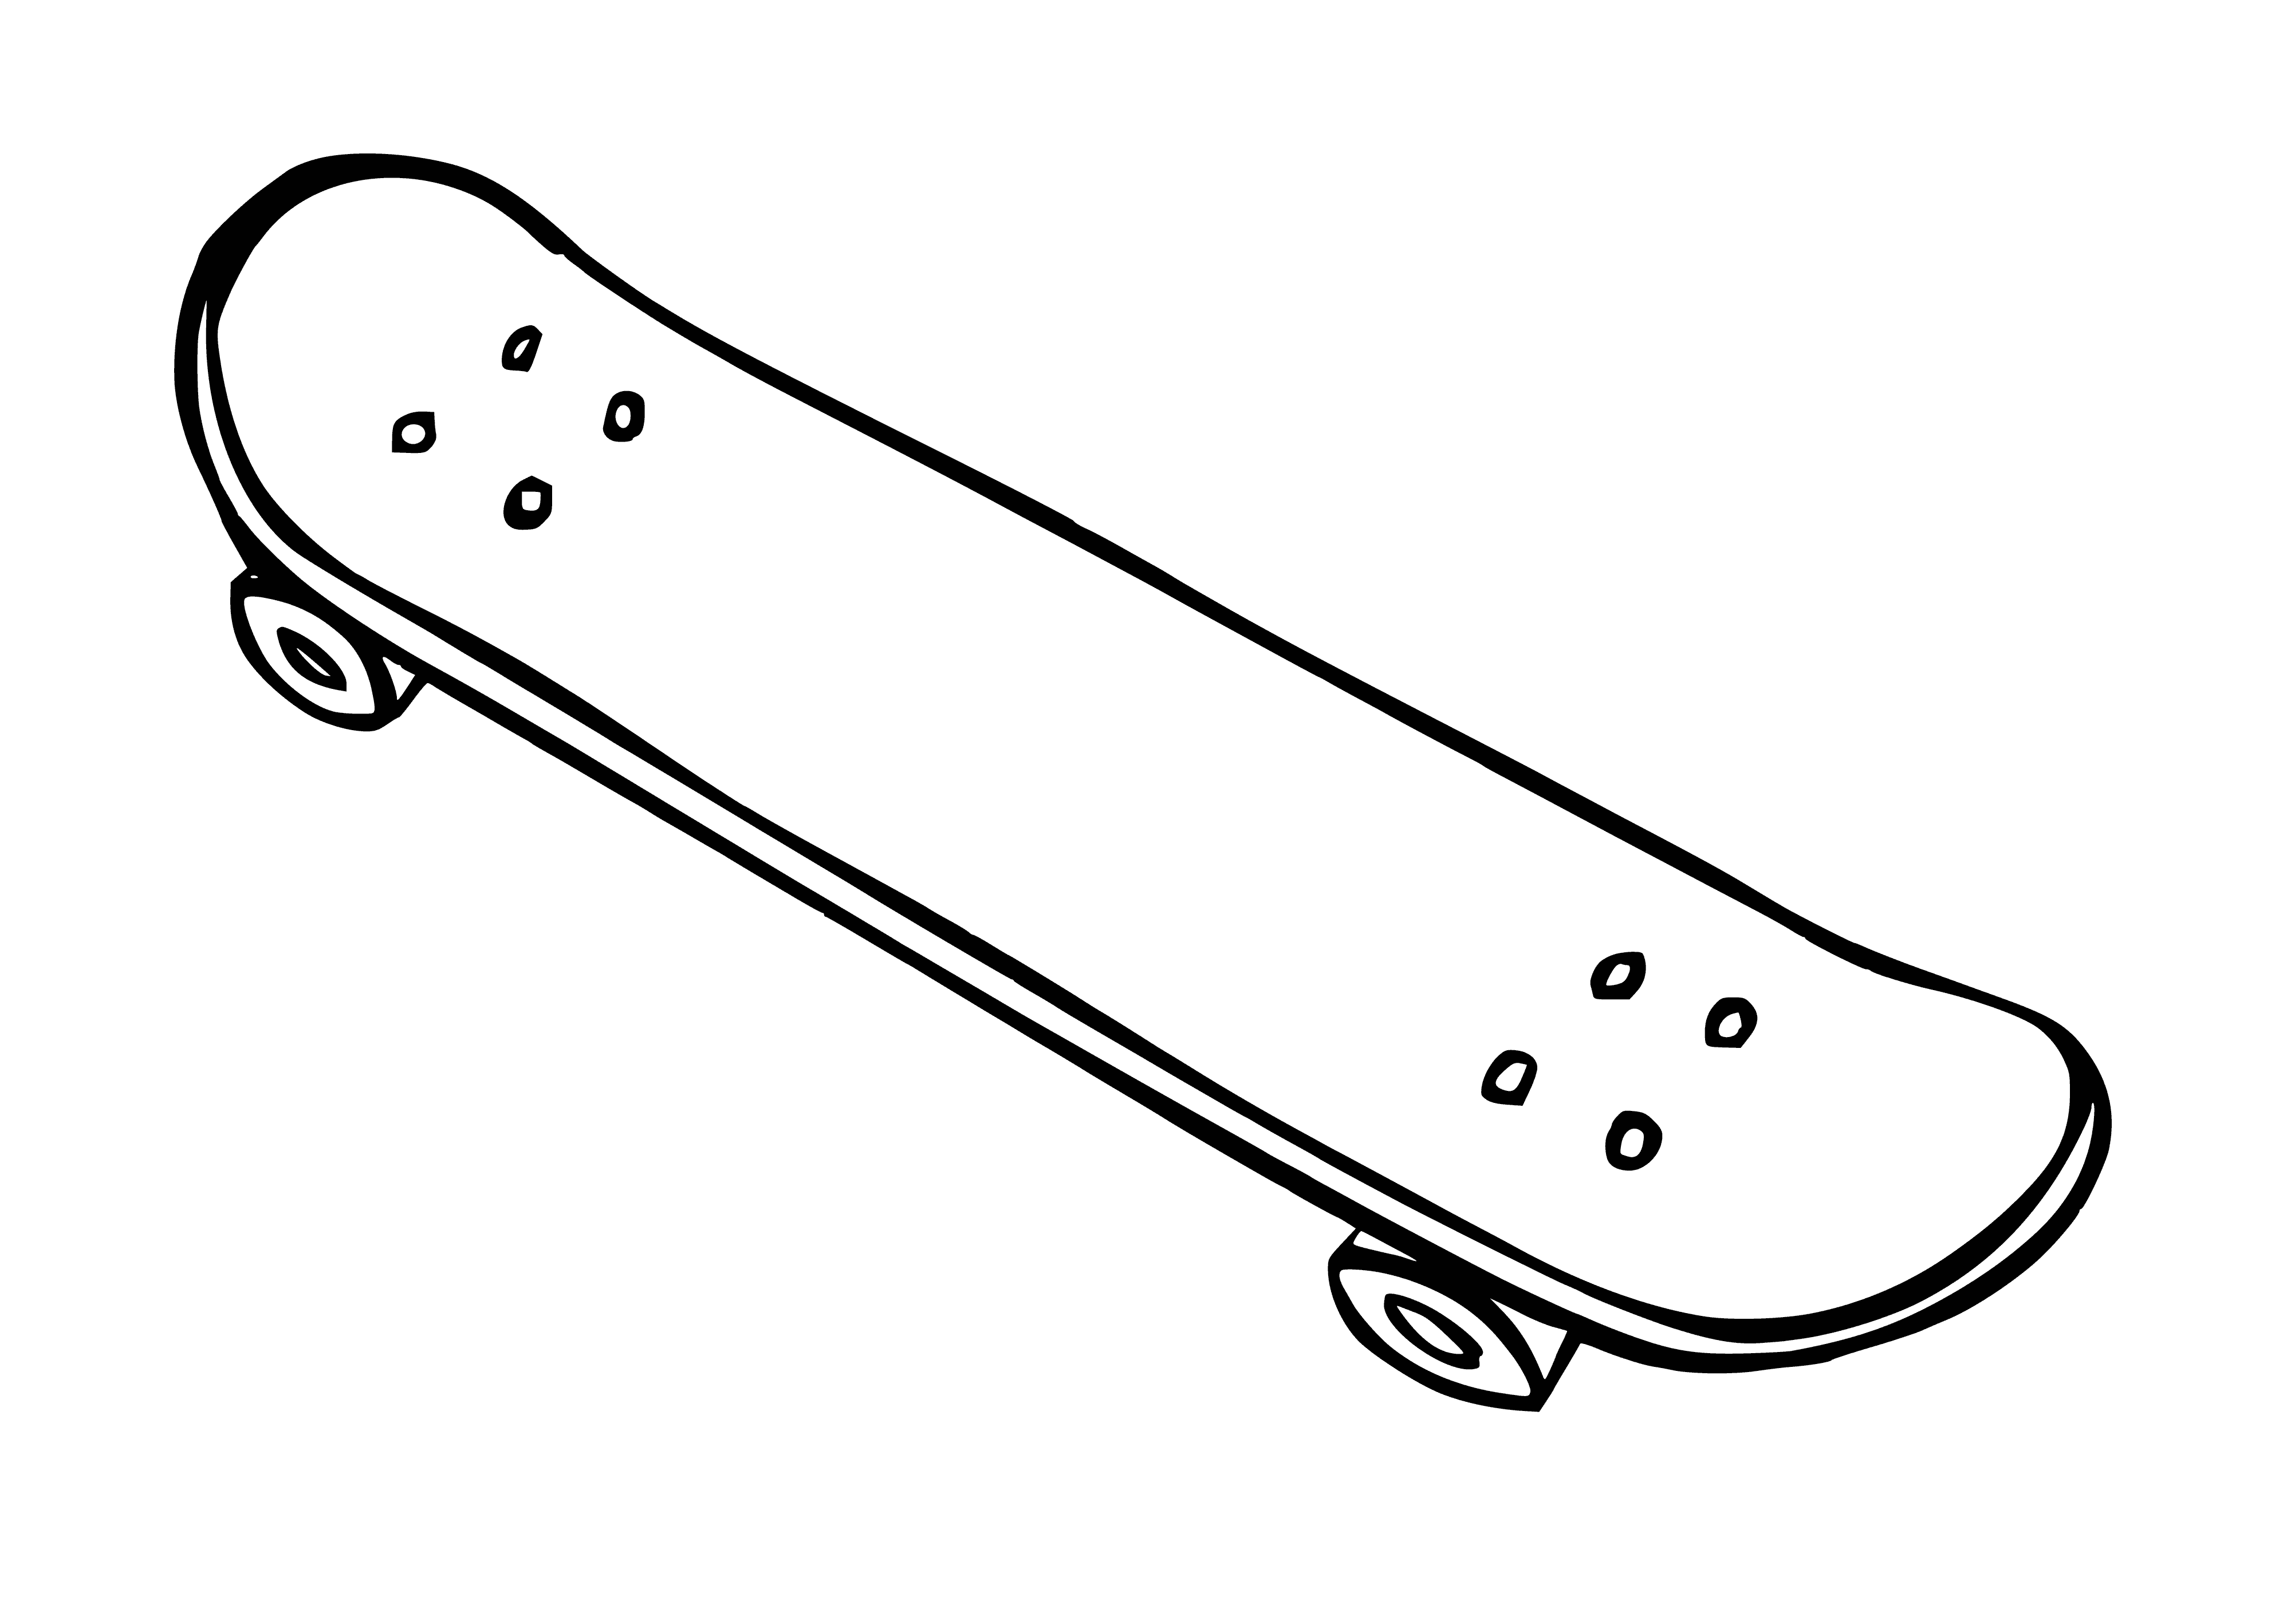 coloring page: Riding a skateboard: standing on a wooden deck, pushing off with the feet and rolling on 4 wheels.